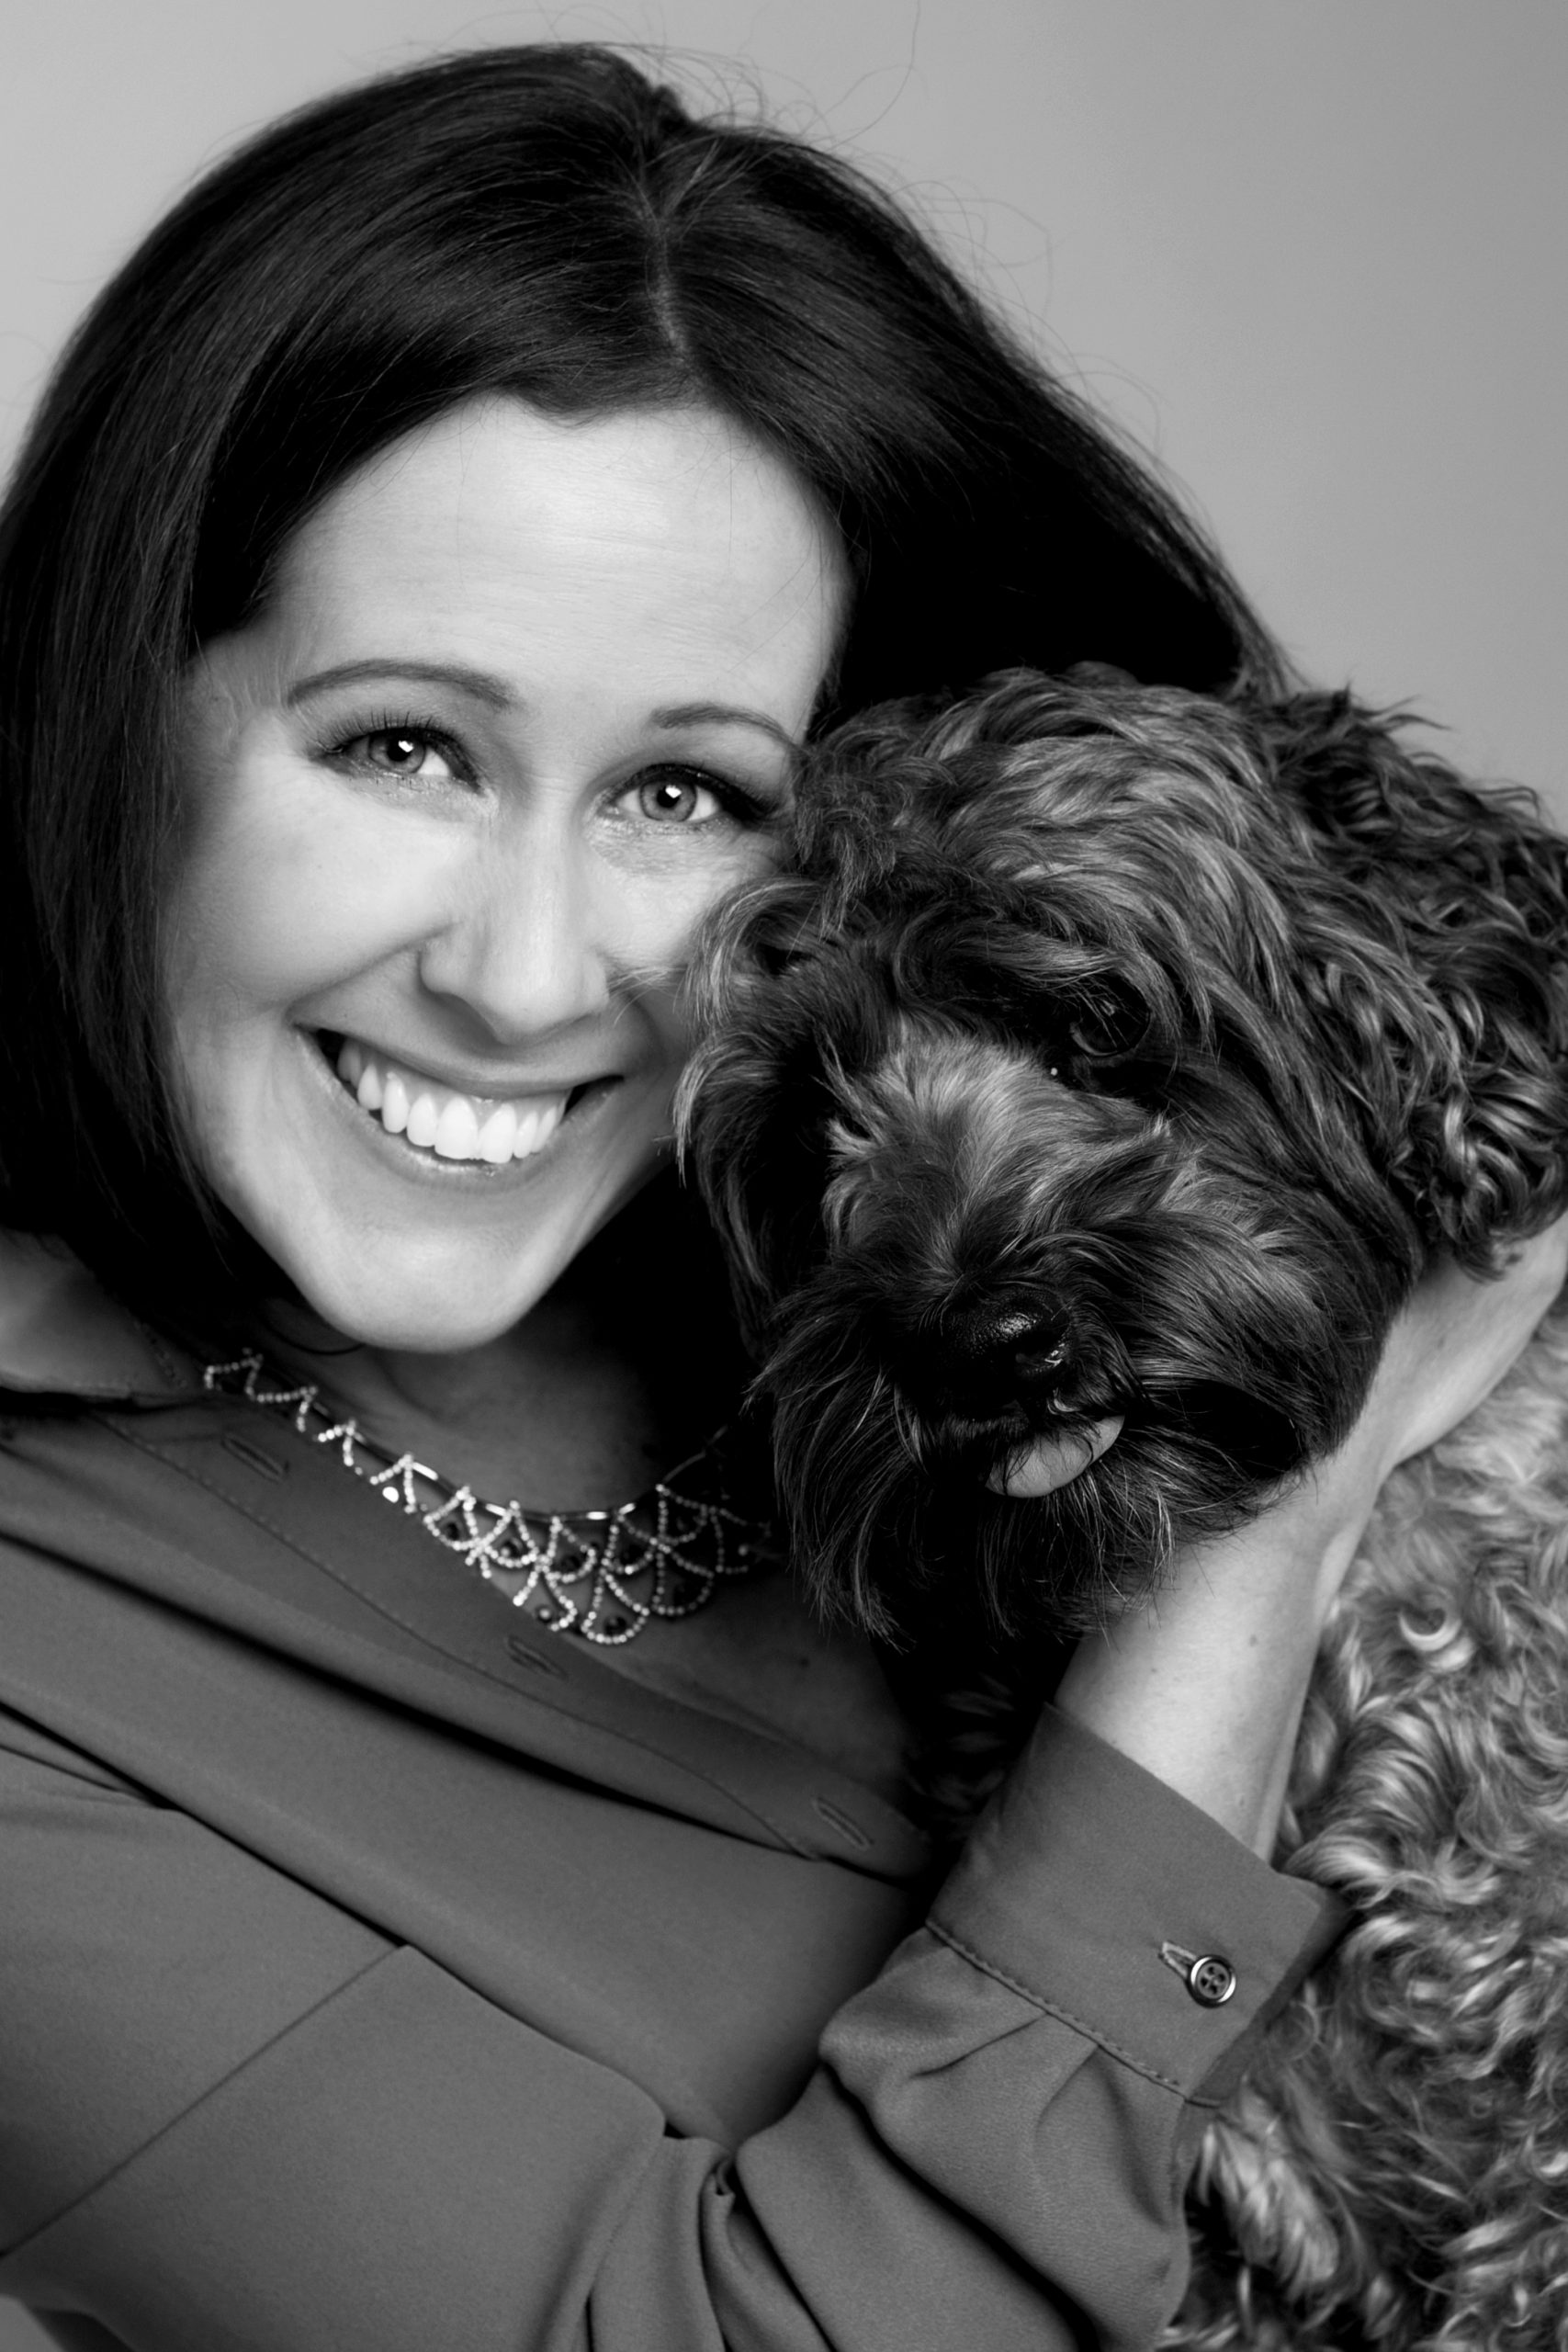 Natalie Moss with her dog from Natalie Moss Photography